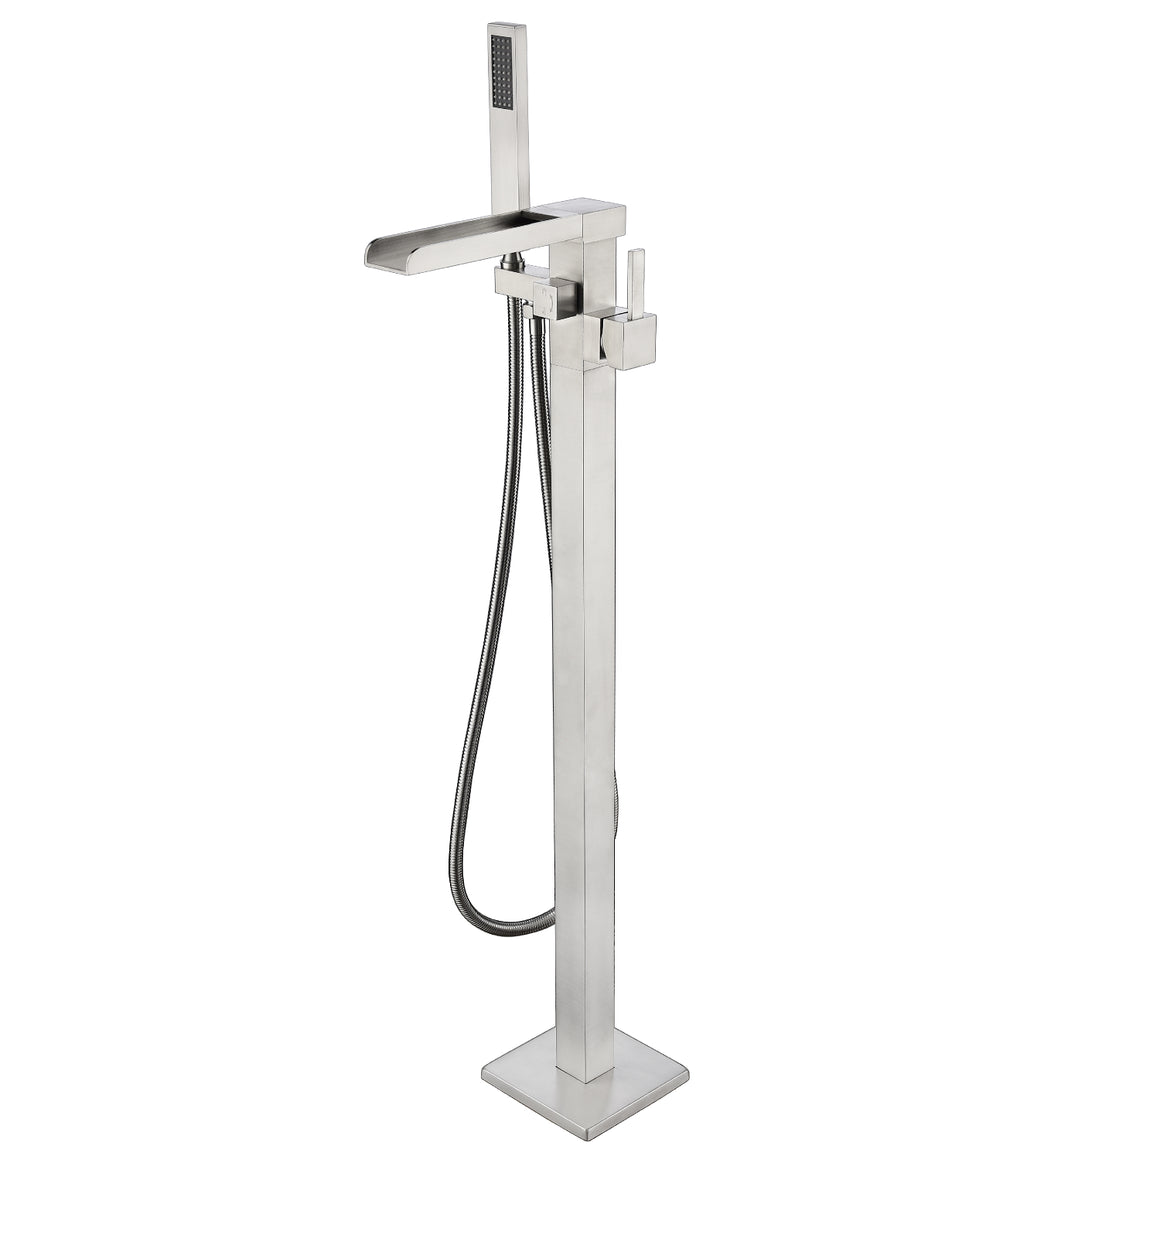 Single Freestanding Bathtub Faucet with Hand Shower in Brushed Nickel